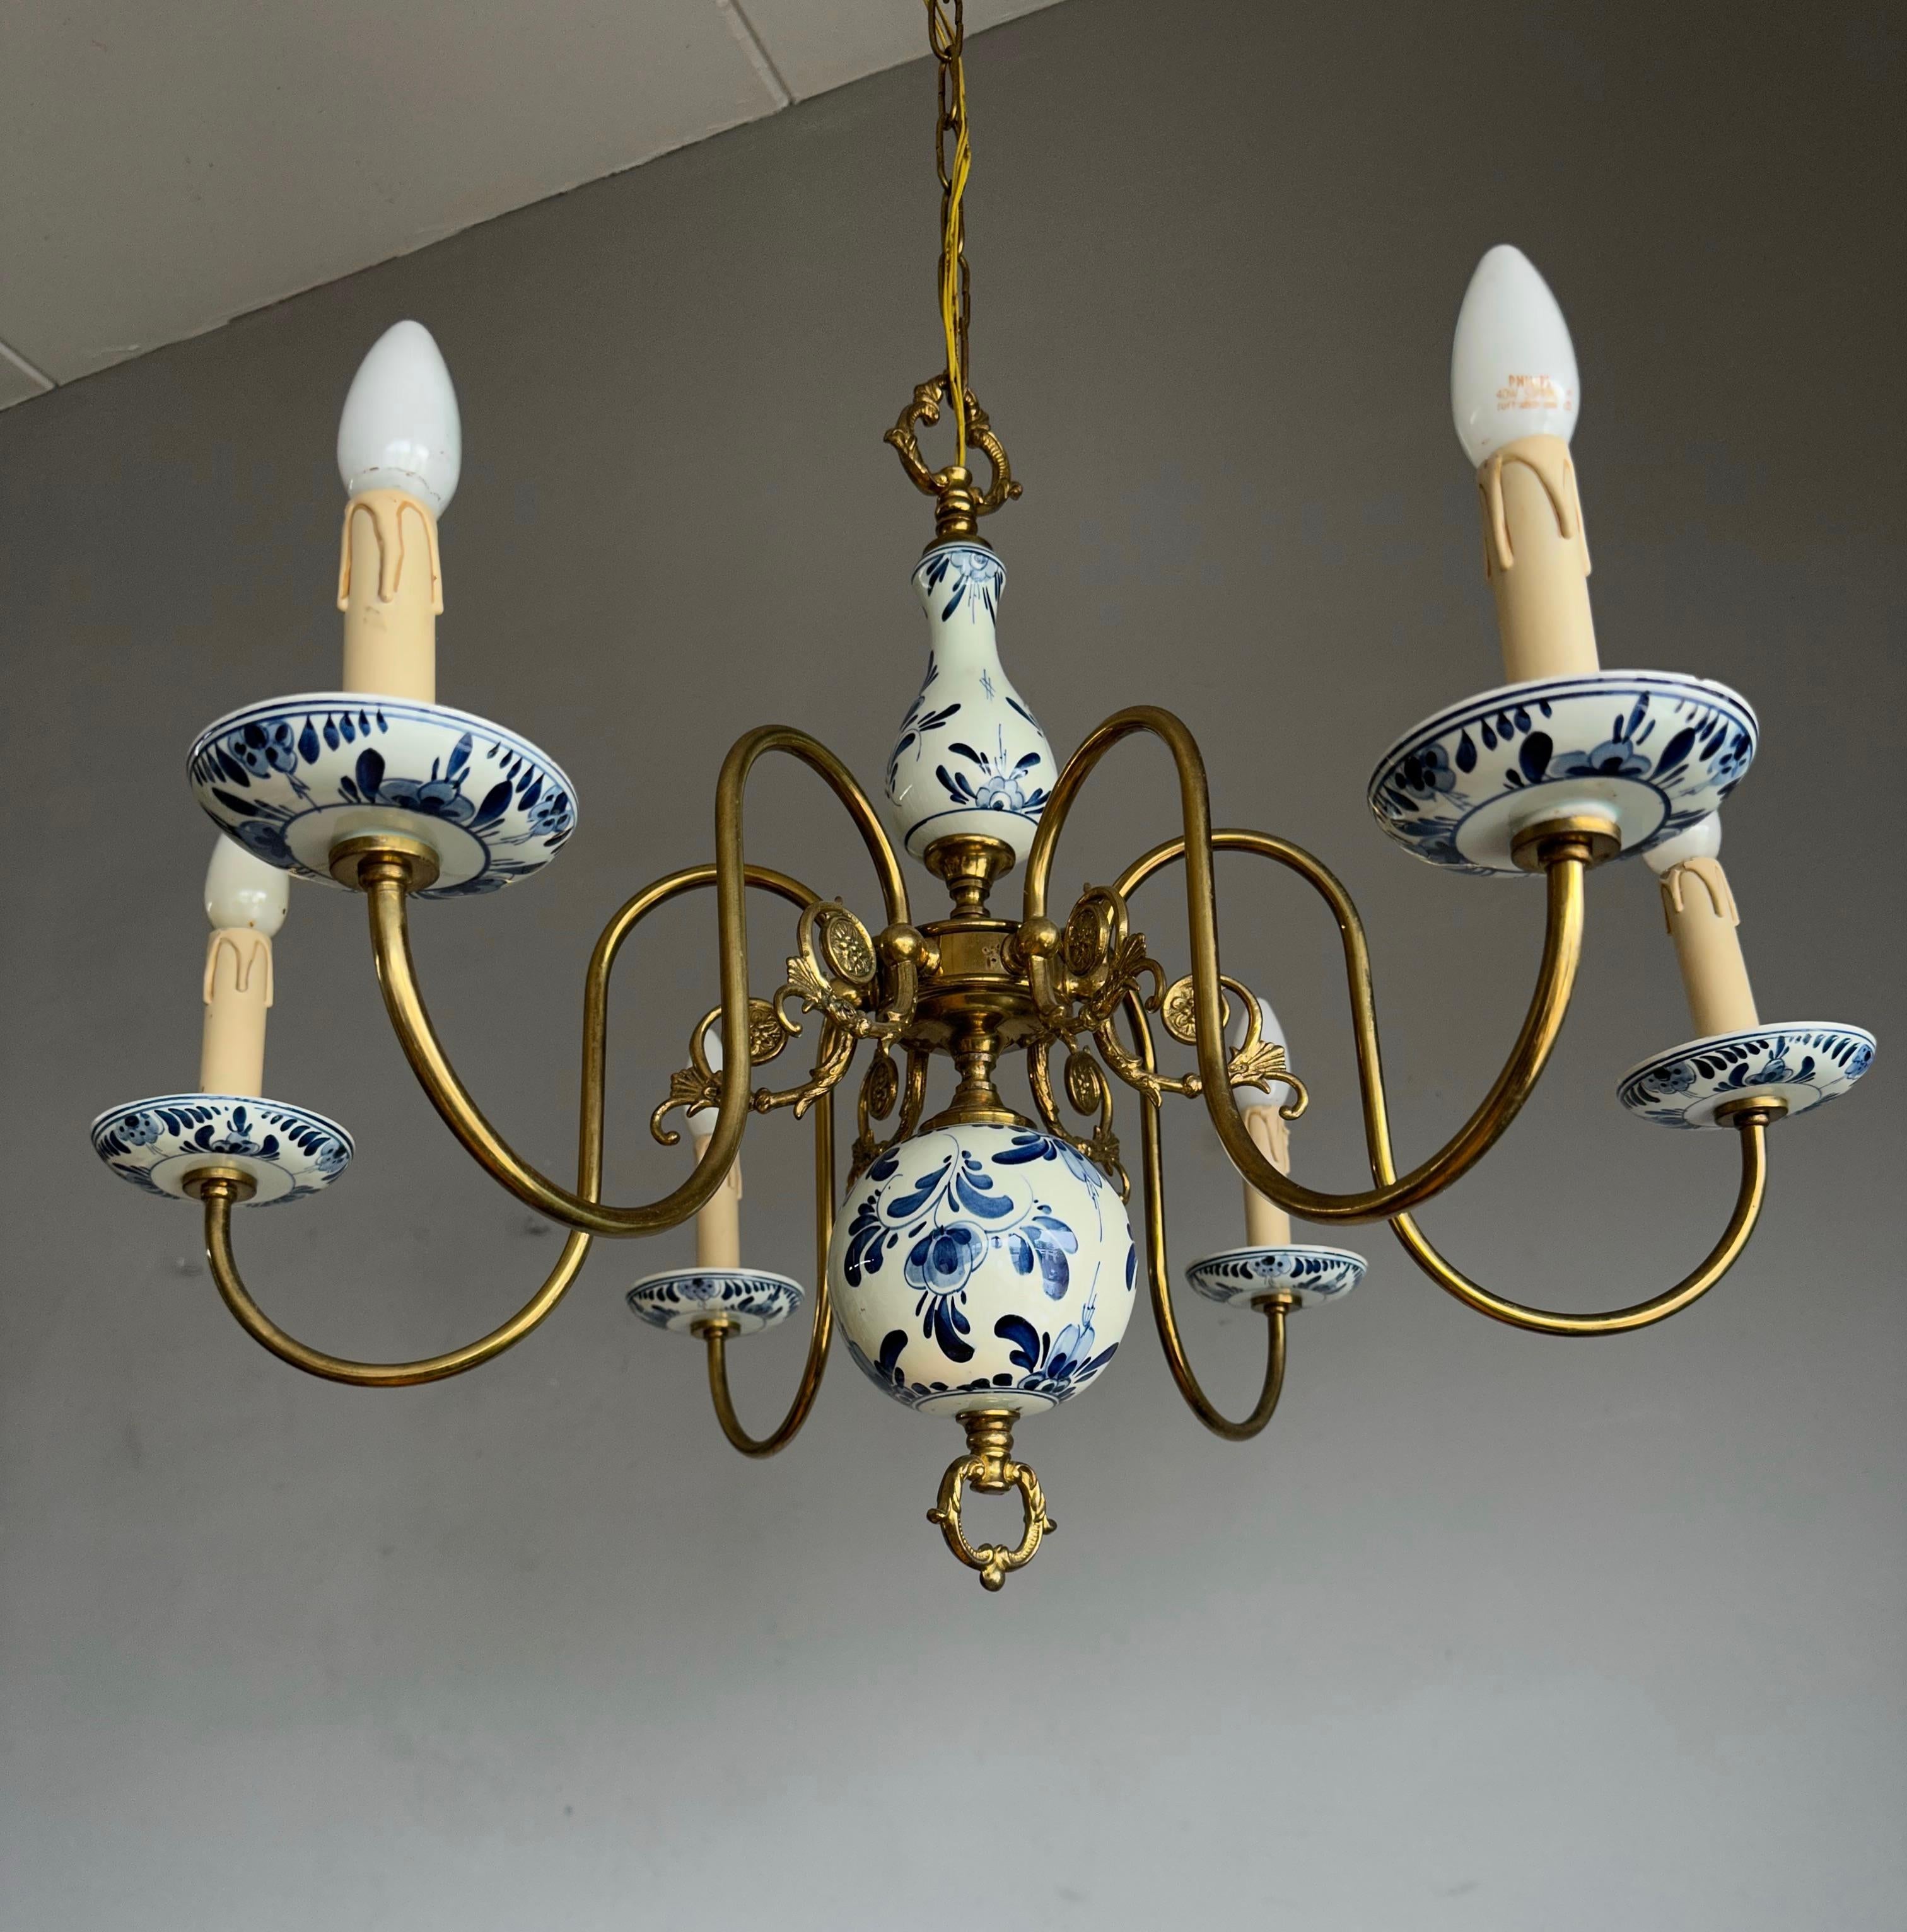 Stunning and good size, six light pendant.

This decorative and top quality made pendant could be perfect for you. Both on and off this great workmanship fixture can create just the right atmosphere in your kitchen, dining or living room. However,